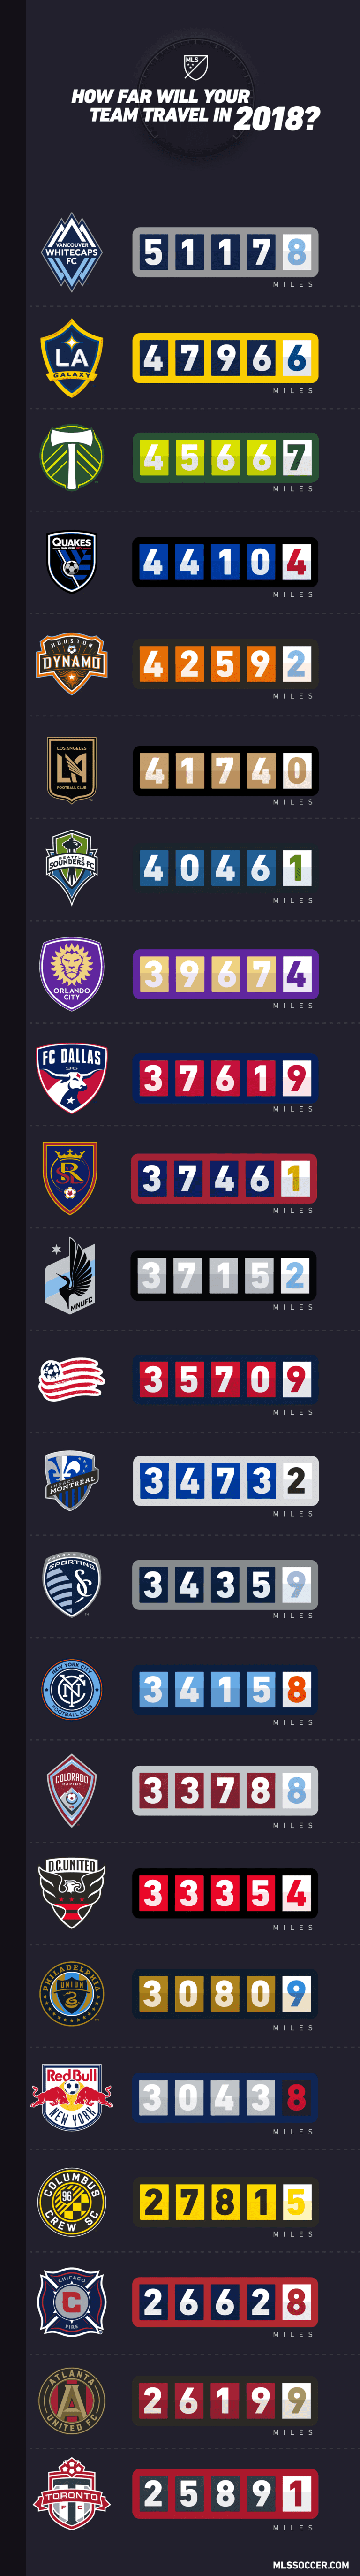 Which team will have to travel the most, least in 2018? - https://league-mp7static.mlsdigital.net/images/2018-miles-infographic-.png?Y7wKuP_FrnPaFphLexcPiORcOE3sF1Z2